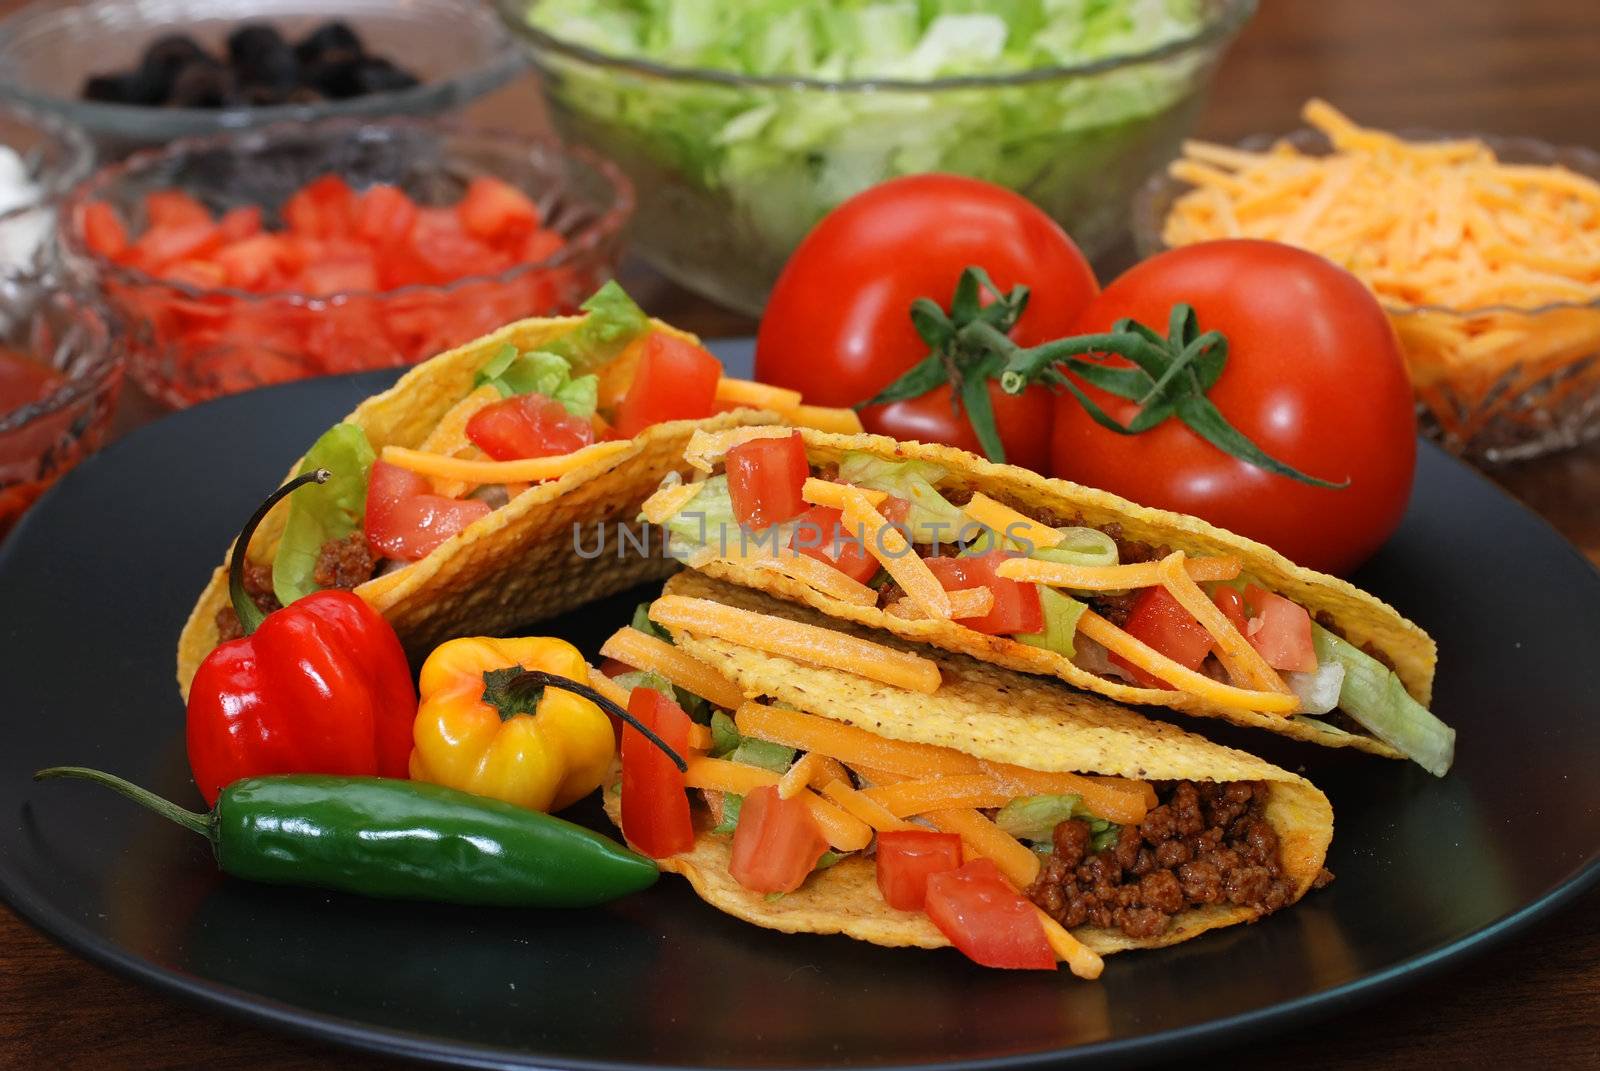 Prepared tacos with tomatoes, habanero and serano peppers on plate.  Ingredients in background.